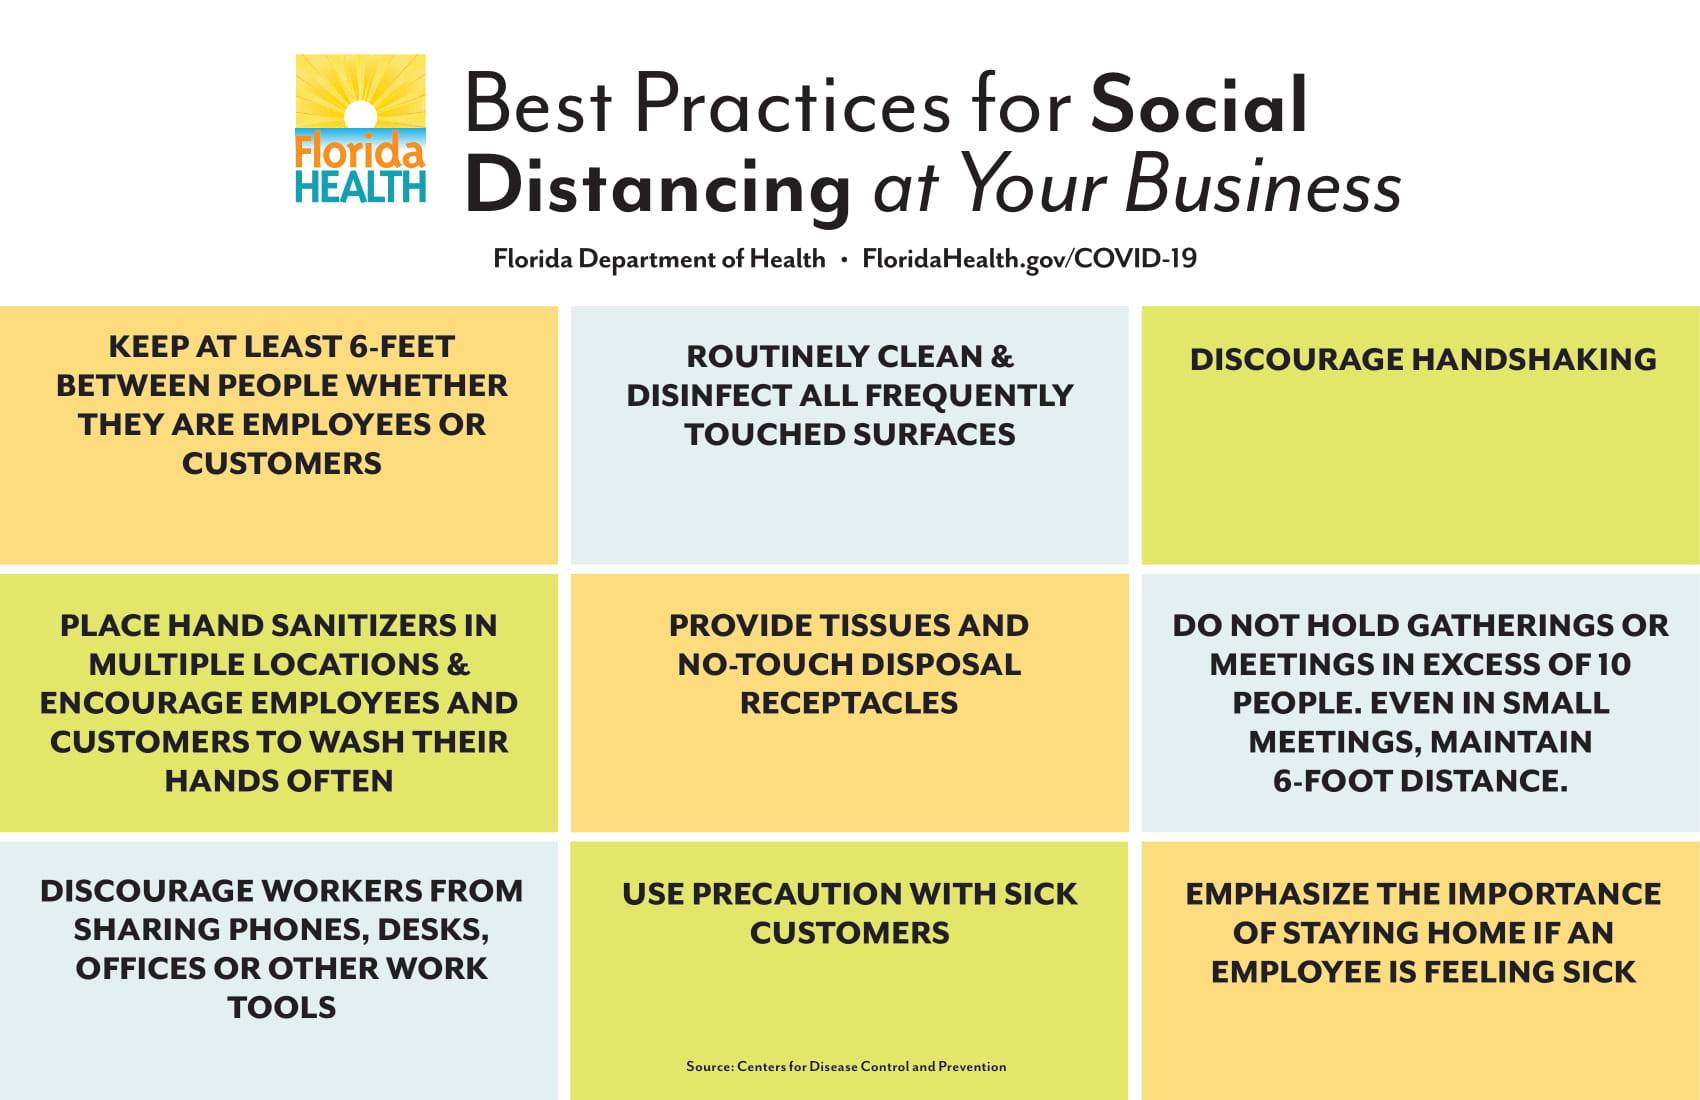 Best practices for social distancing at your business